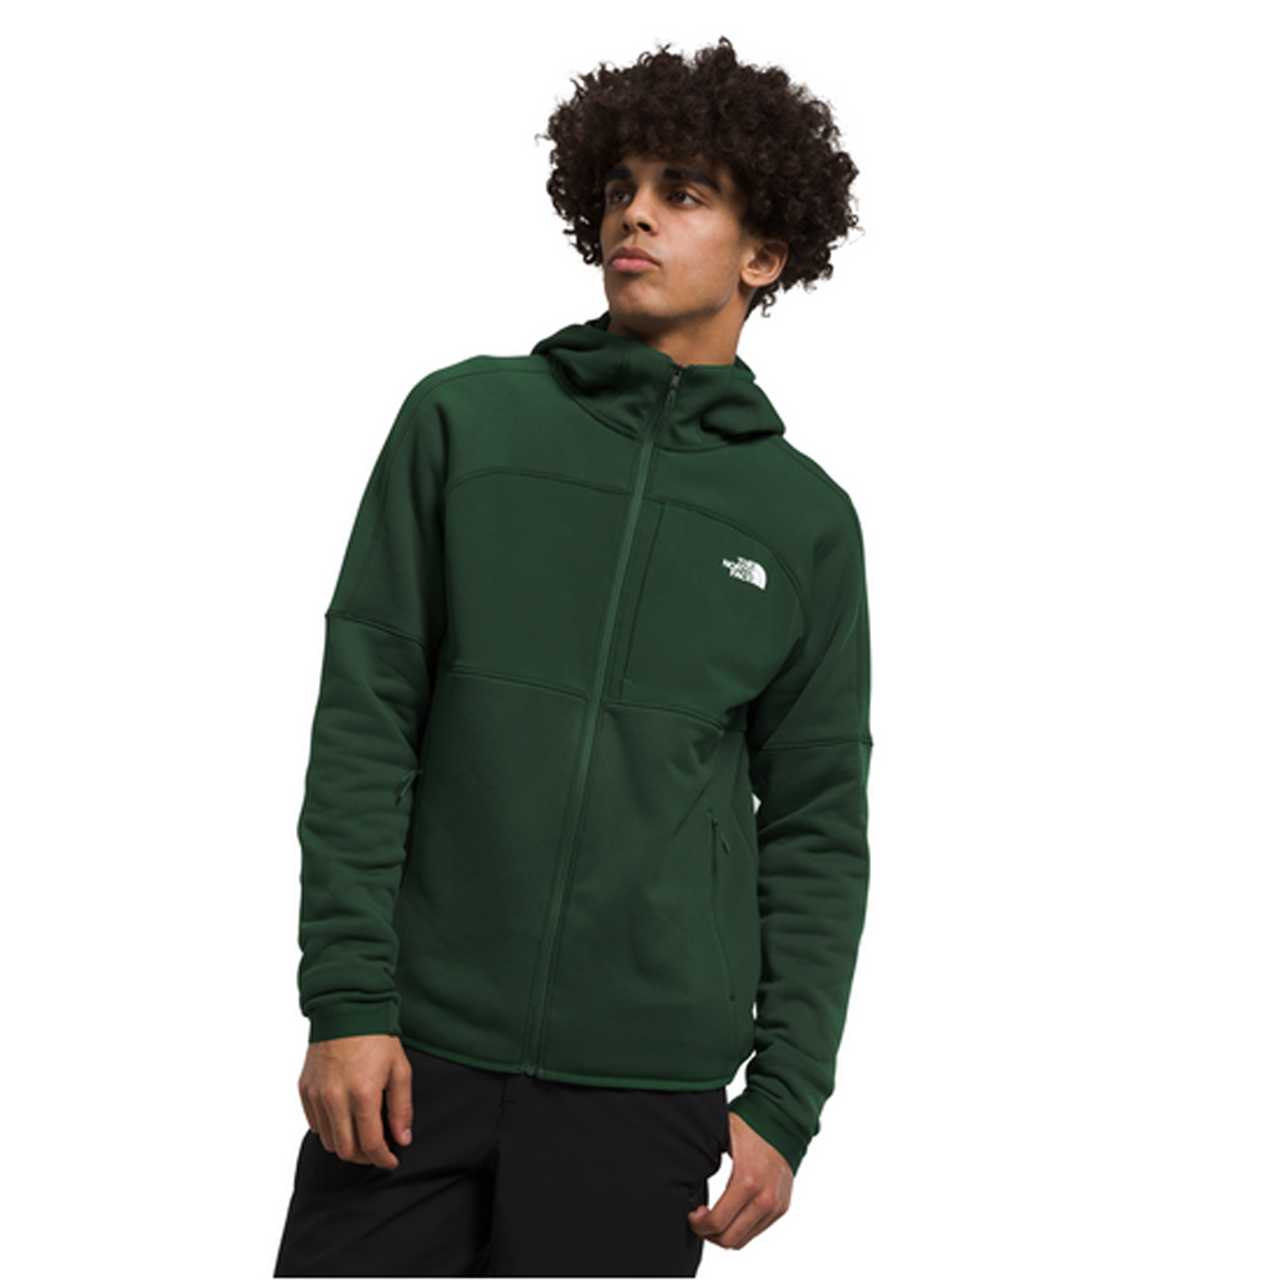 The North Face Flashdry Base Layer, Men's Fashion, Tops & Sets